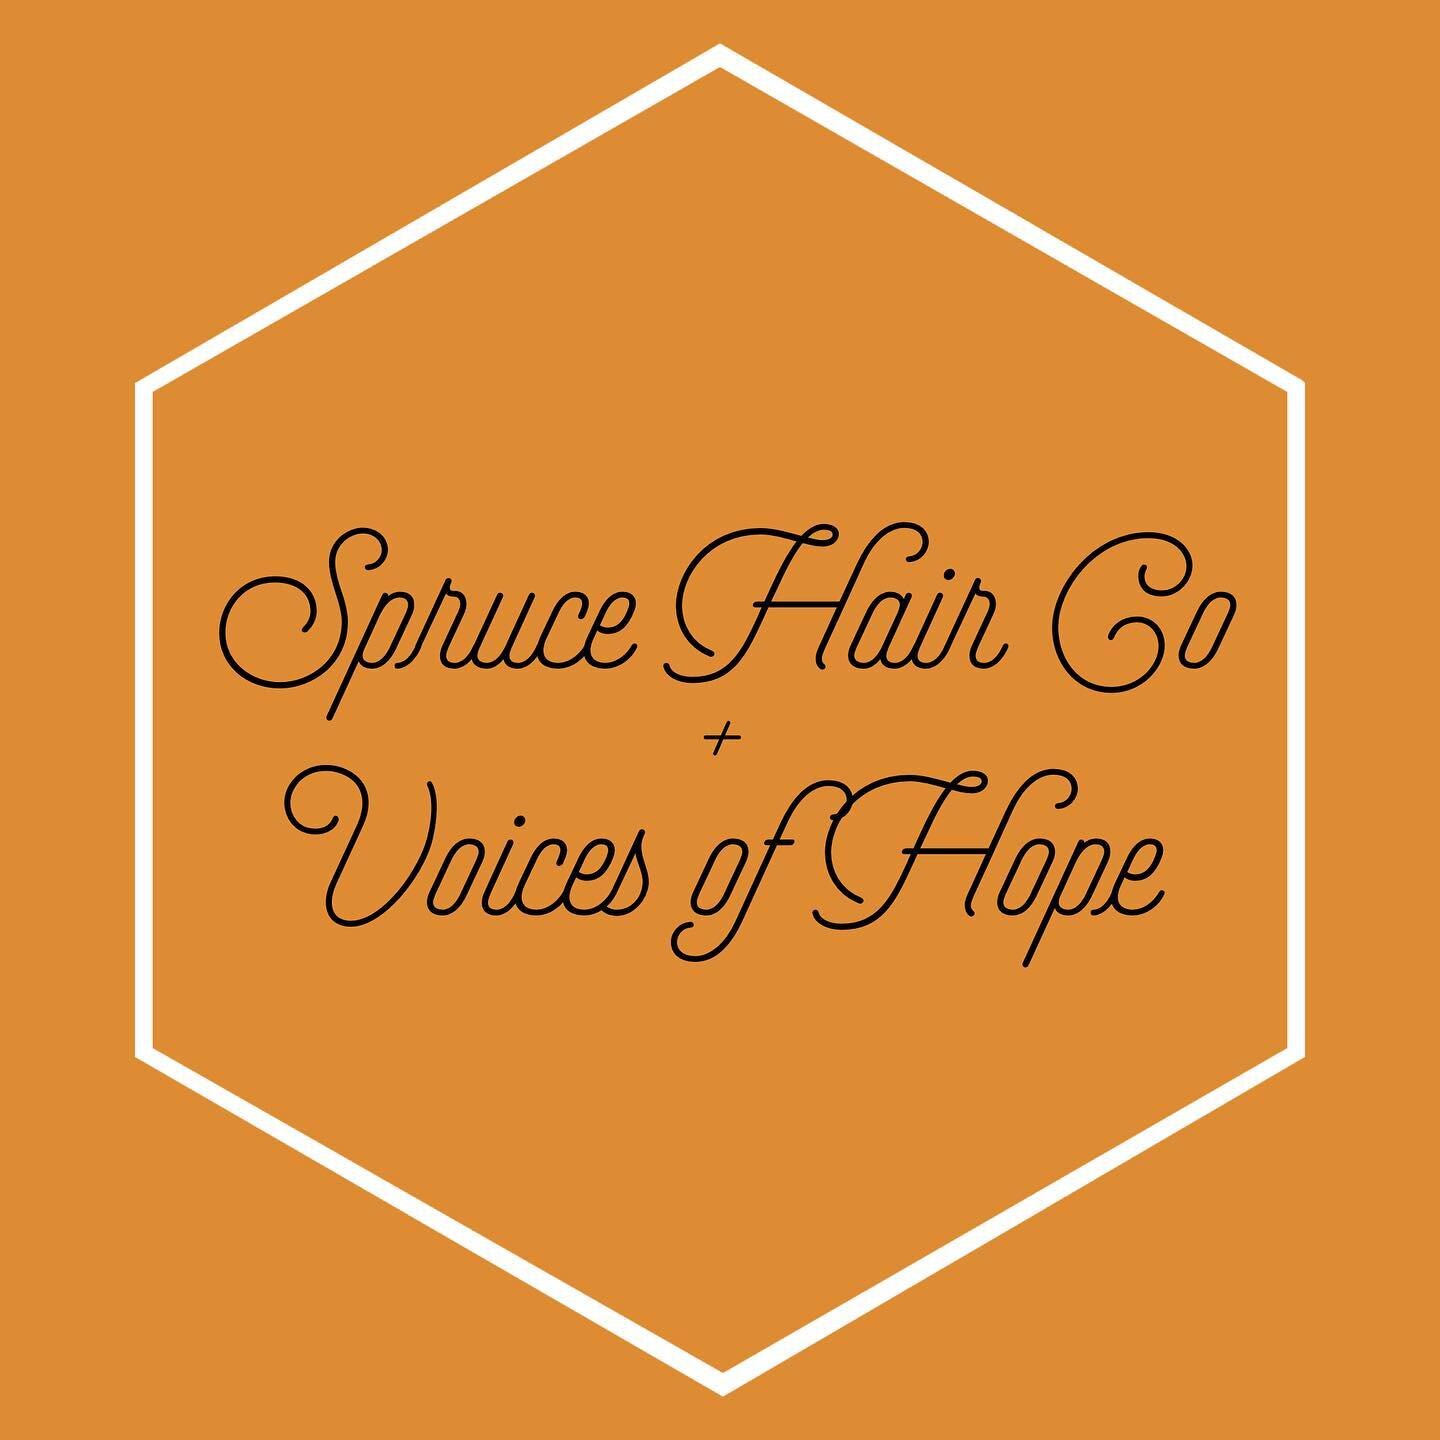 Hey, all! We have a special announcement to share with you.
March 20th is officially the first day of Spring and to kick off a new season we at Spruce Hair Co will be doing a donation drive for Voices of Hope.
VoH helps adults and children in domesti